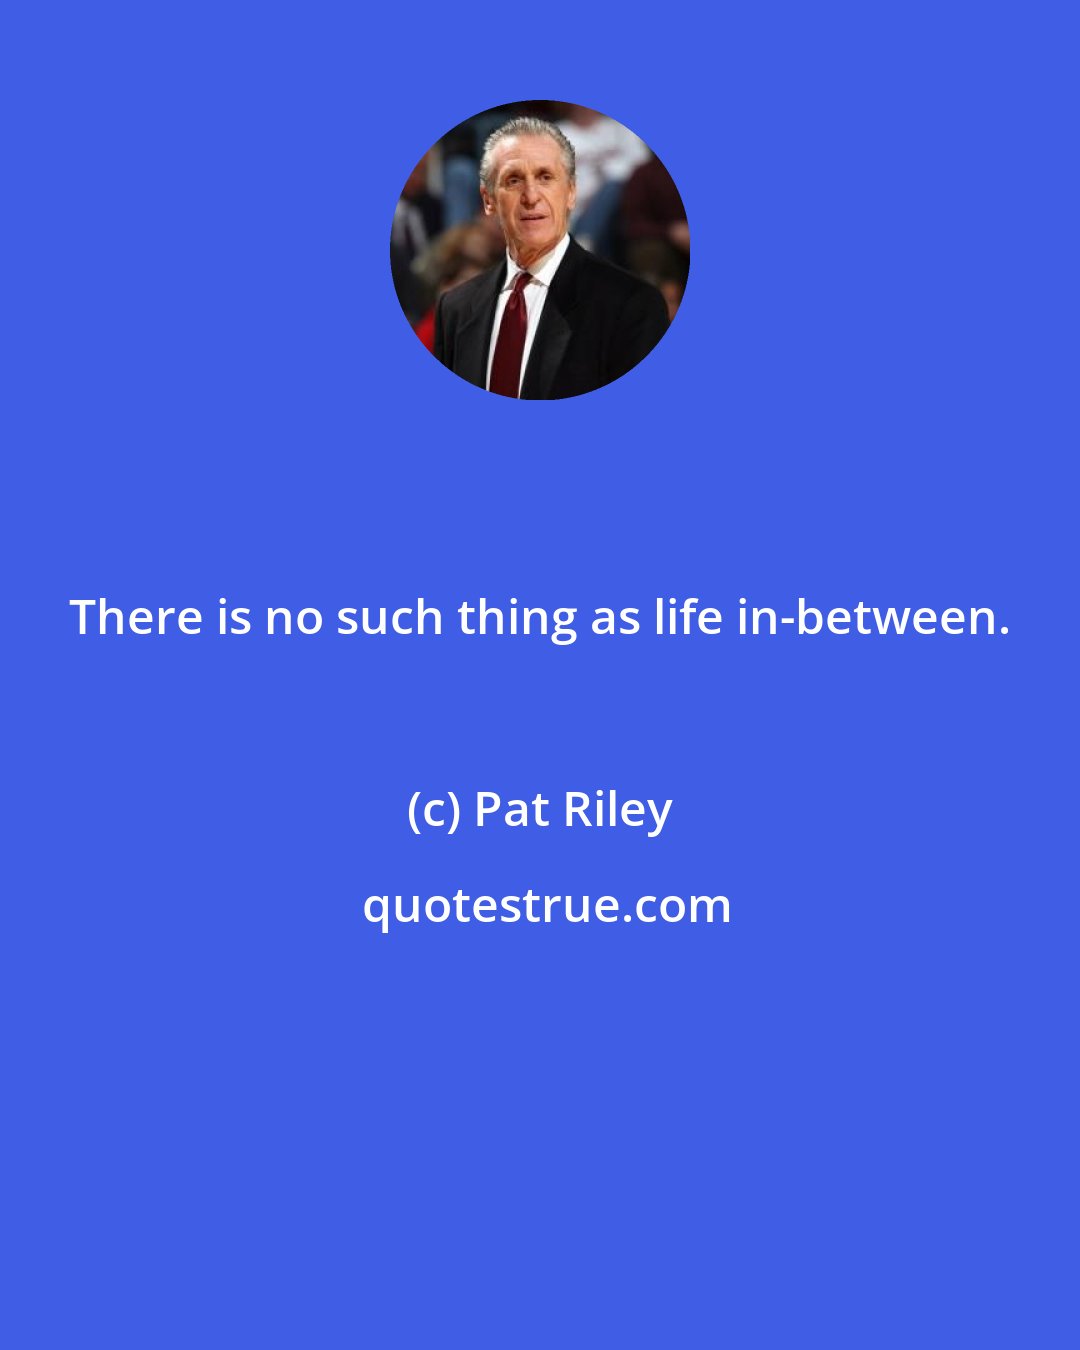 Pat Riley: There is no such thing as life in-between.